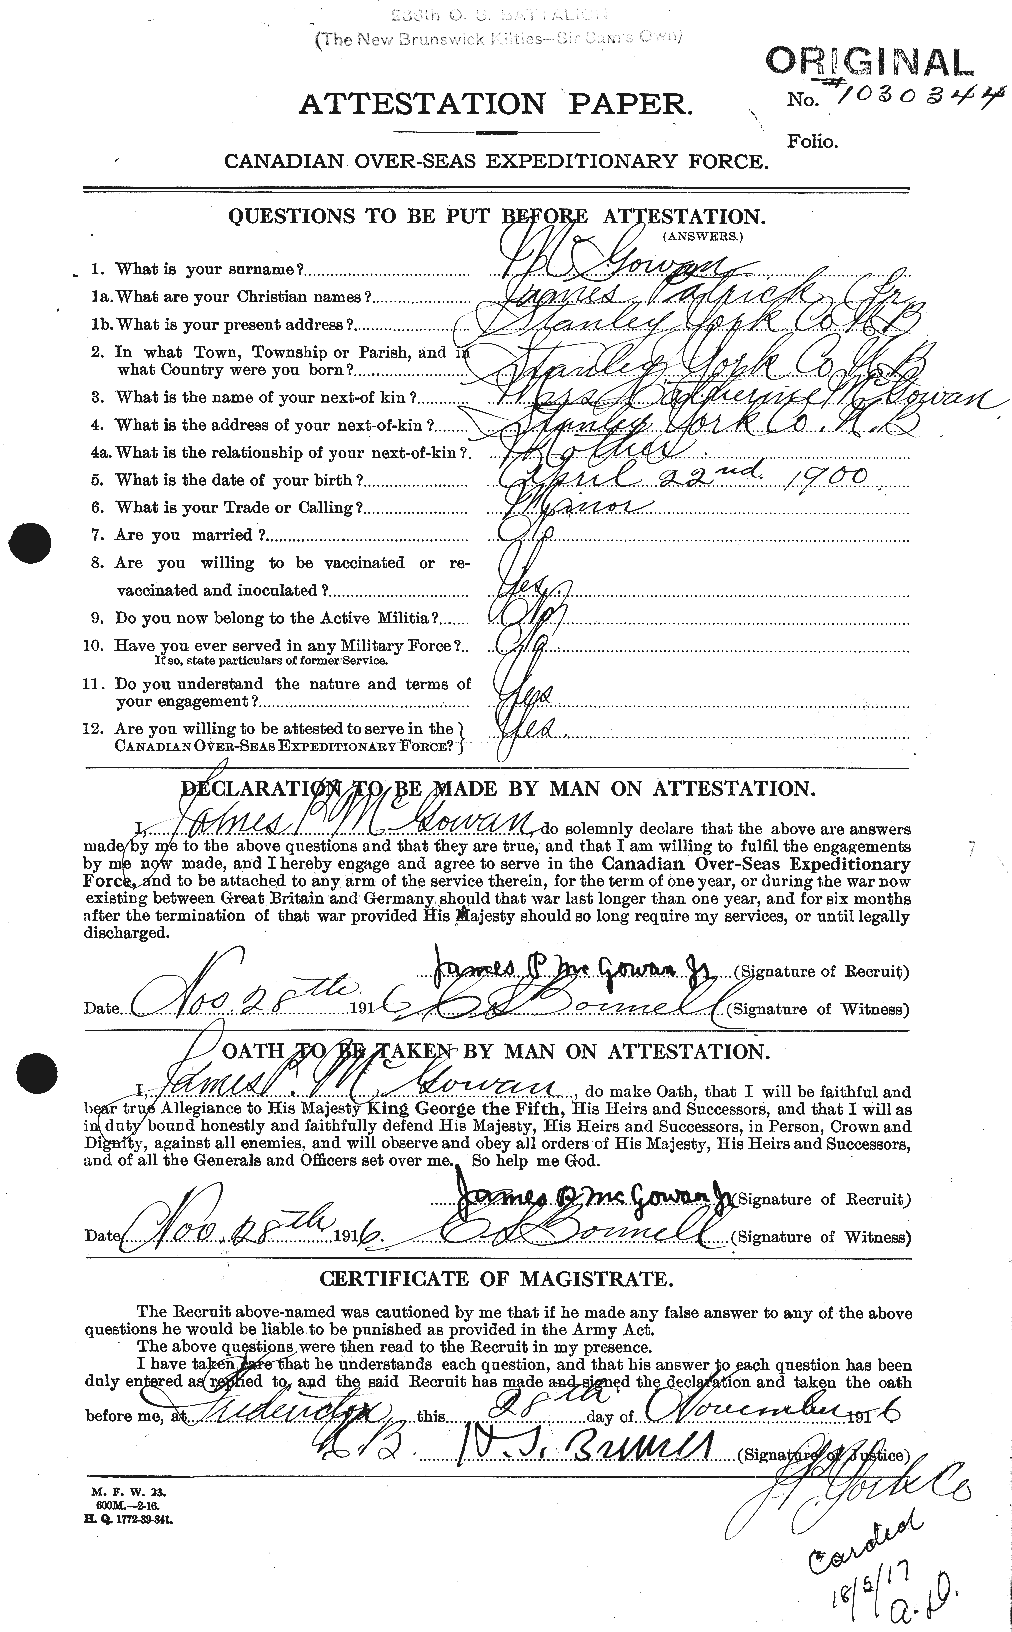 Personnel Records of the First World War - CEF 523160a